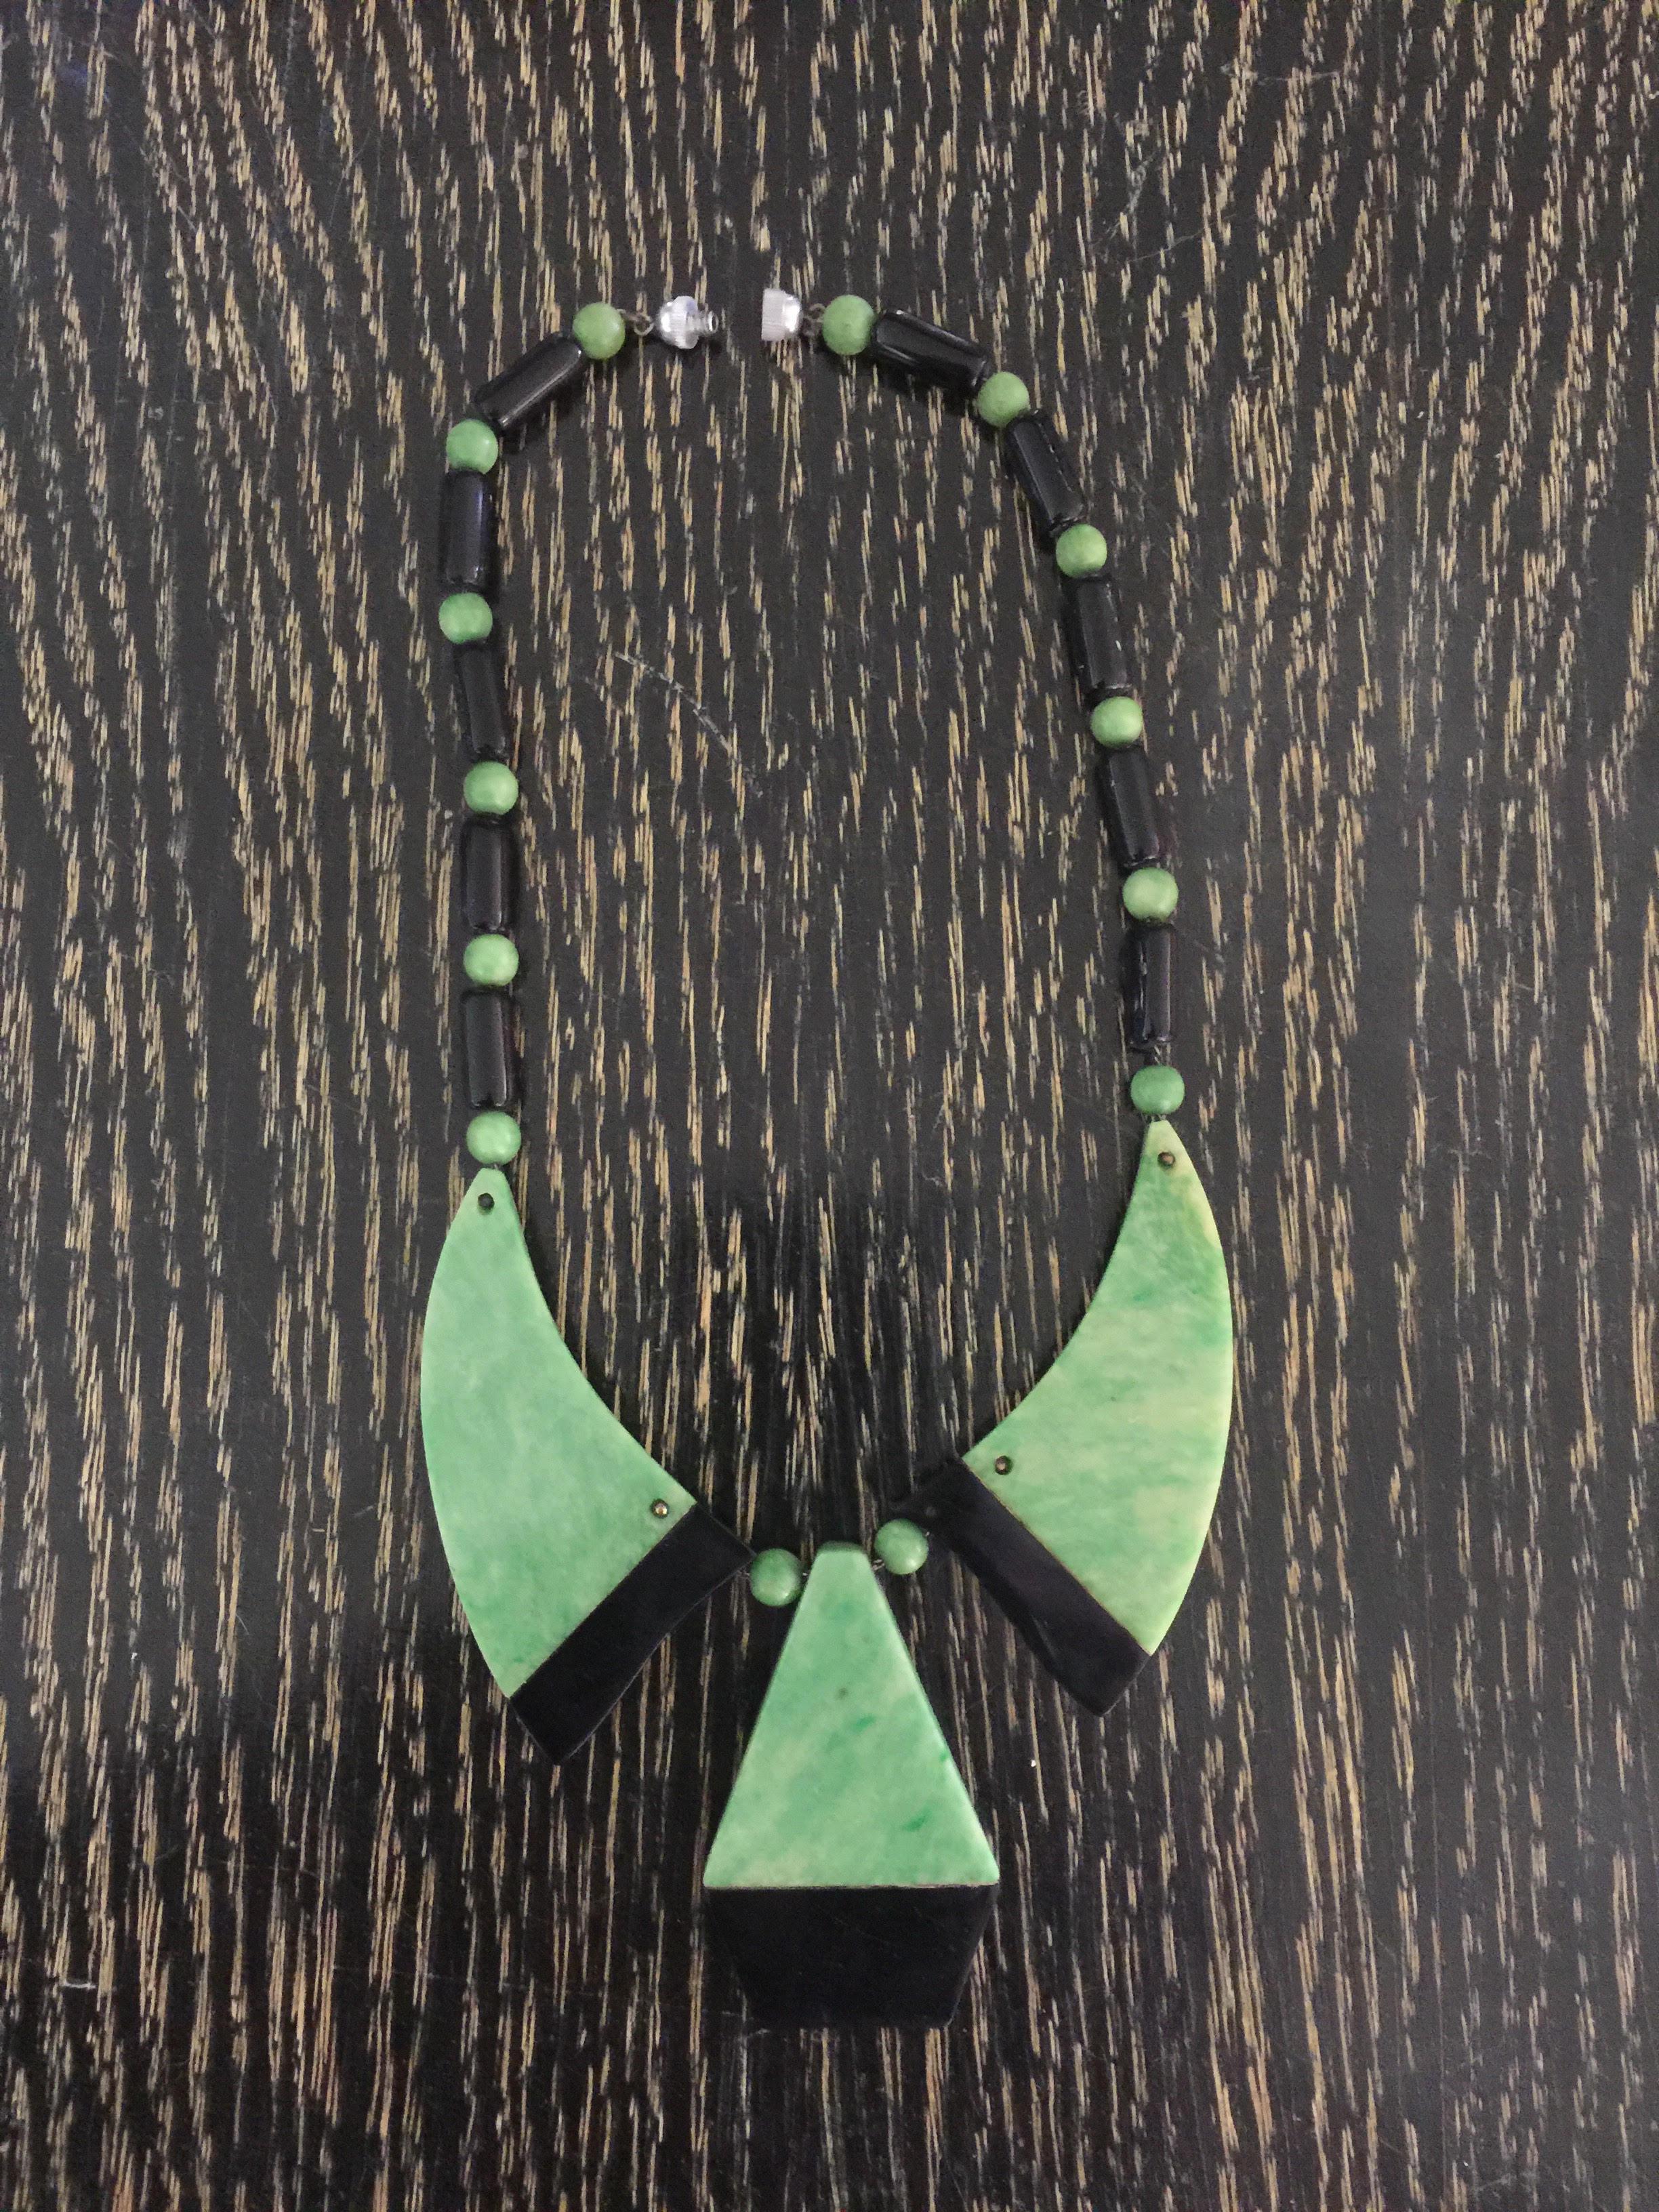 Exotic and luxuriant, this Green and Black Galalith and Faux Shagreen European Art Deco 1930s Necklace is most definitely Art Deco in style and most probably French in origin. The combination of black galalith as well as resin in luscious celadon